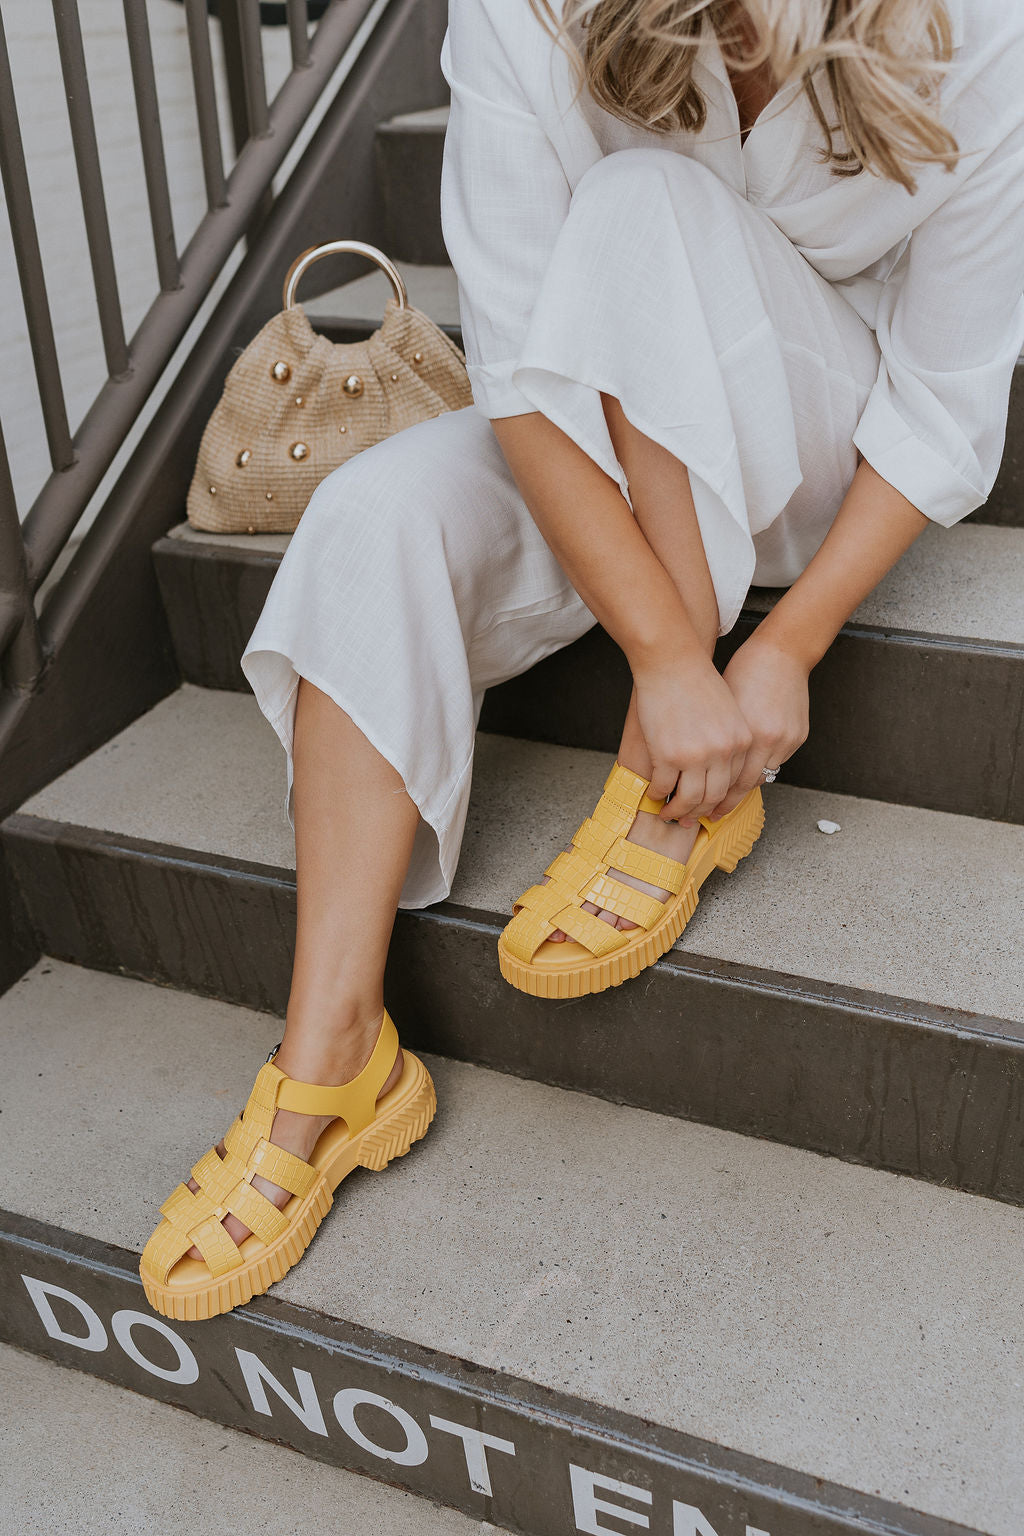 Side view of female model wearing the ONA Streetworks Fisherman Sandal in Yellow Ray & Pilsner which features Yellow Leather Upper Fabric, Monochrome Croc Details, Fisherman Sandal Silhouette, Adjustable Buckle Closure, 2" Heel Height and 1 1/2" Platform Height